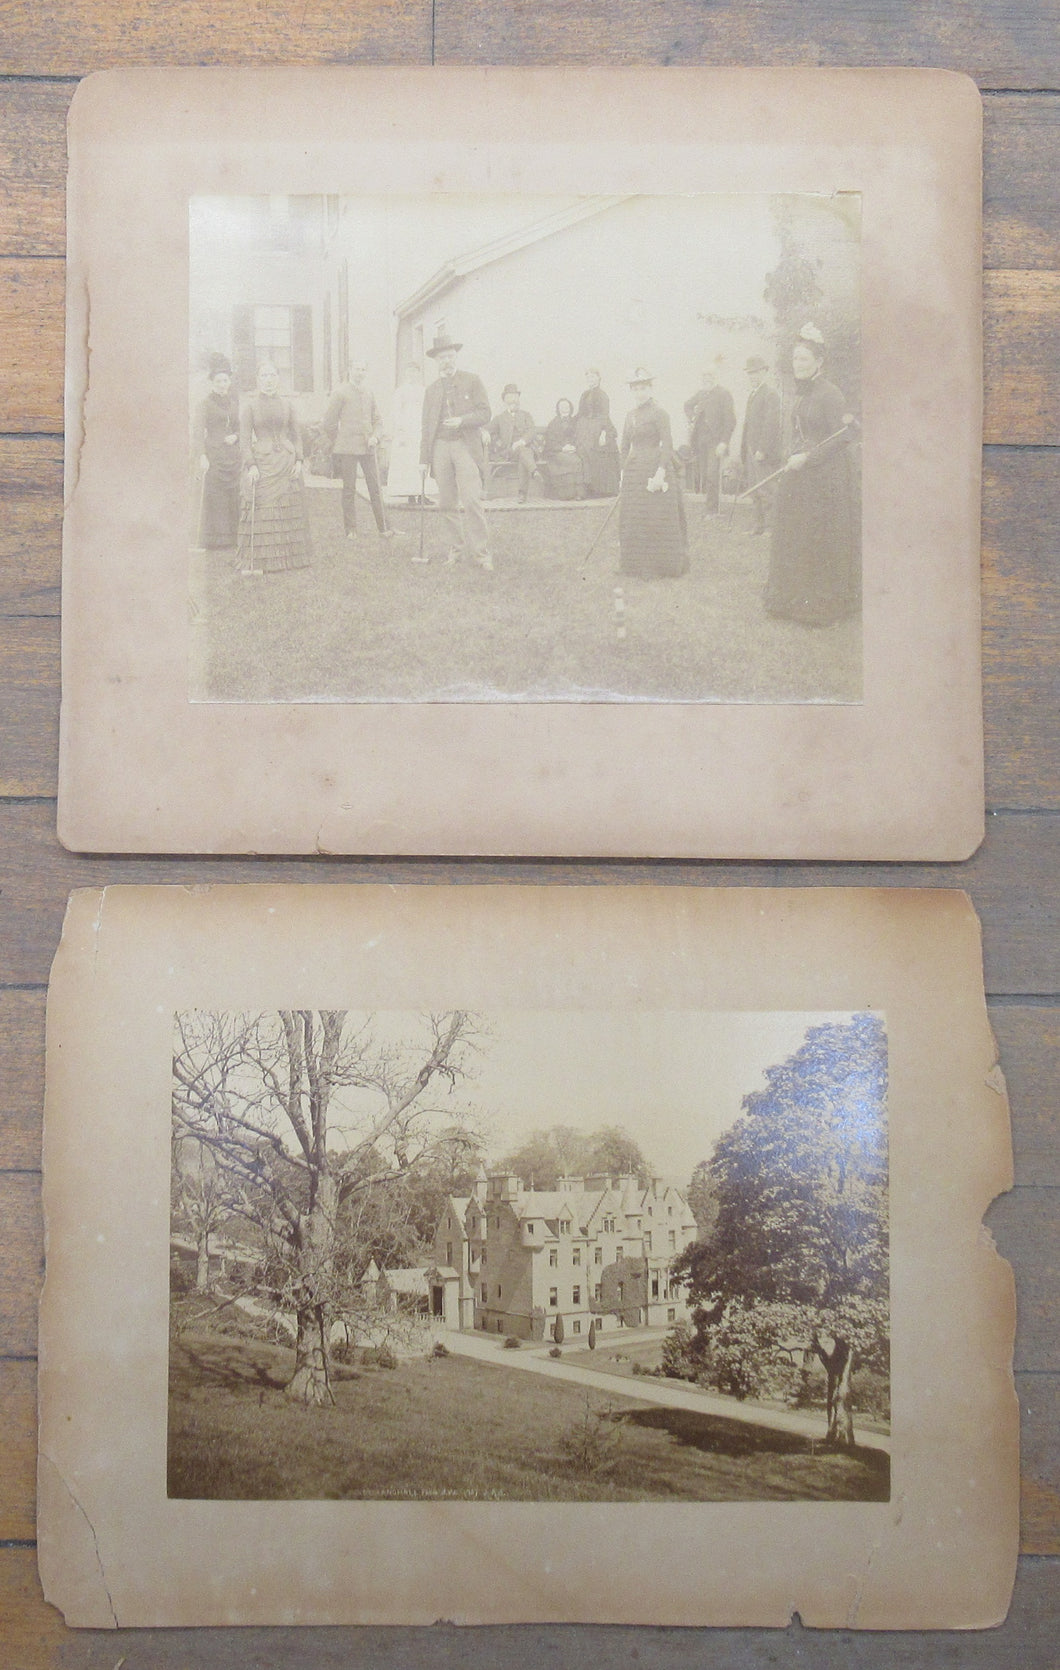 Photo of Sunderland Hall, Selkirk, Scotland, accompanied by photo of croquet players